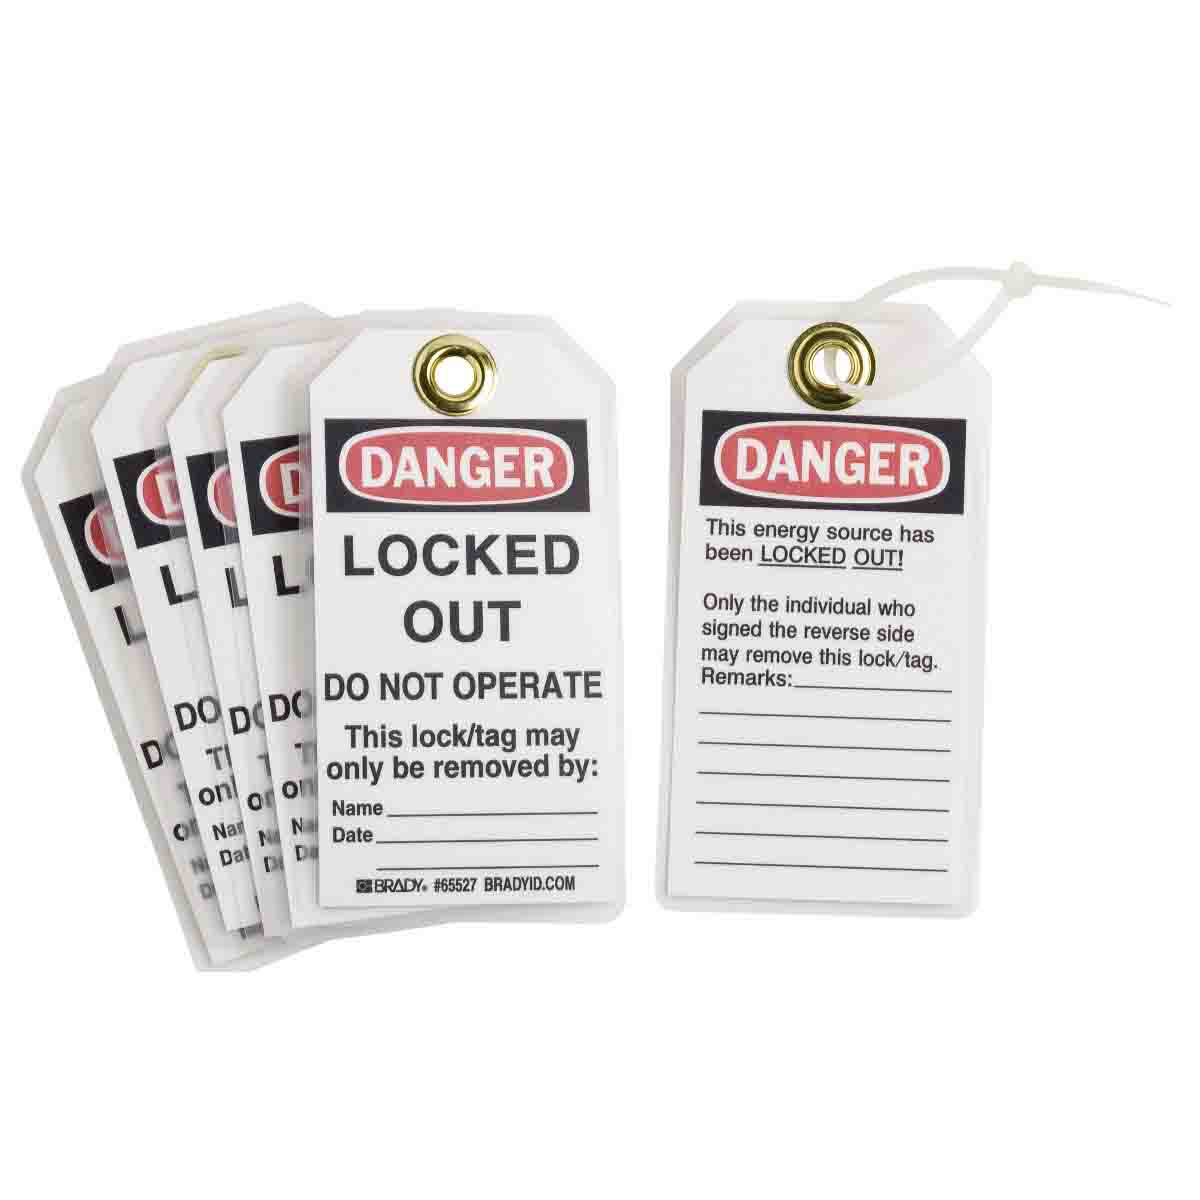 Brady® 65451 Rectangular Lockout Tag, 5-3/4 in H x 3 in W, Black/Red on White, 3/8 in Hole, B-853 Cardstock